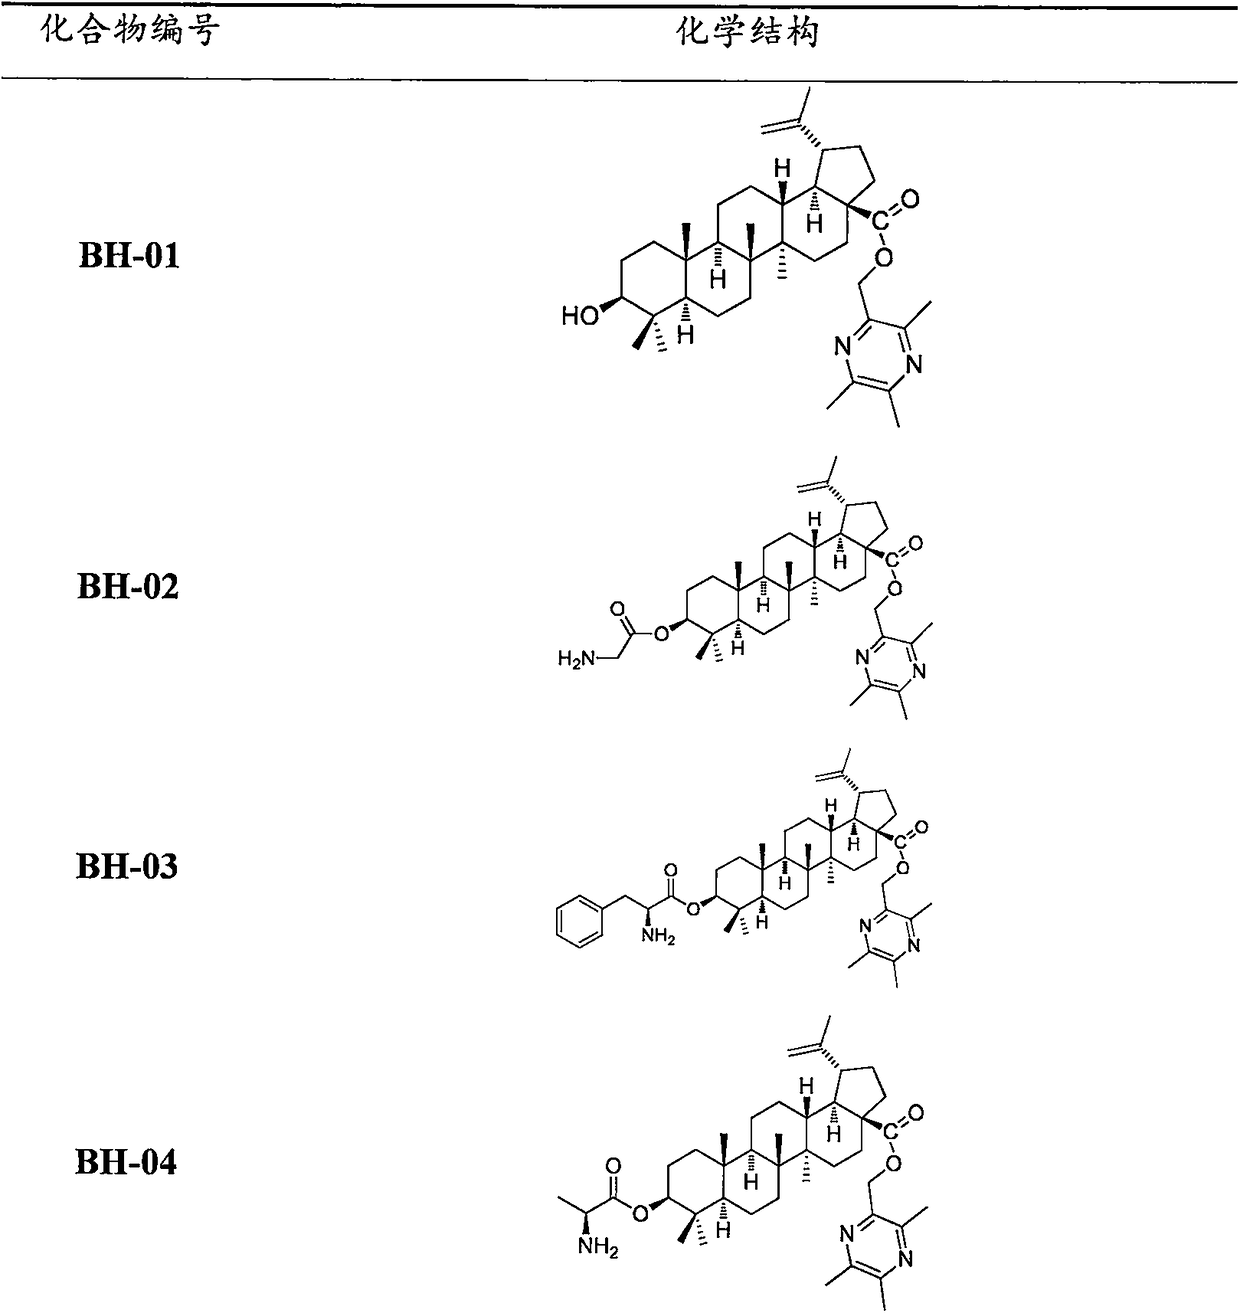 Compound BA-X having antitumor effect, preparation method and applications thereof